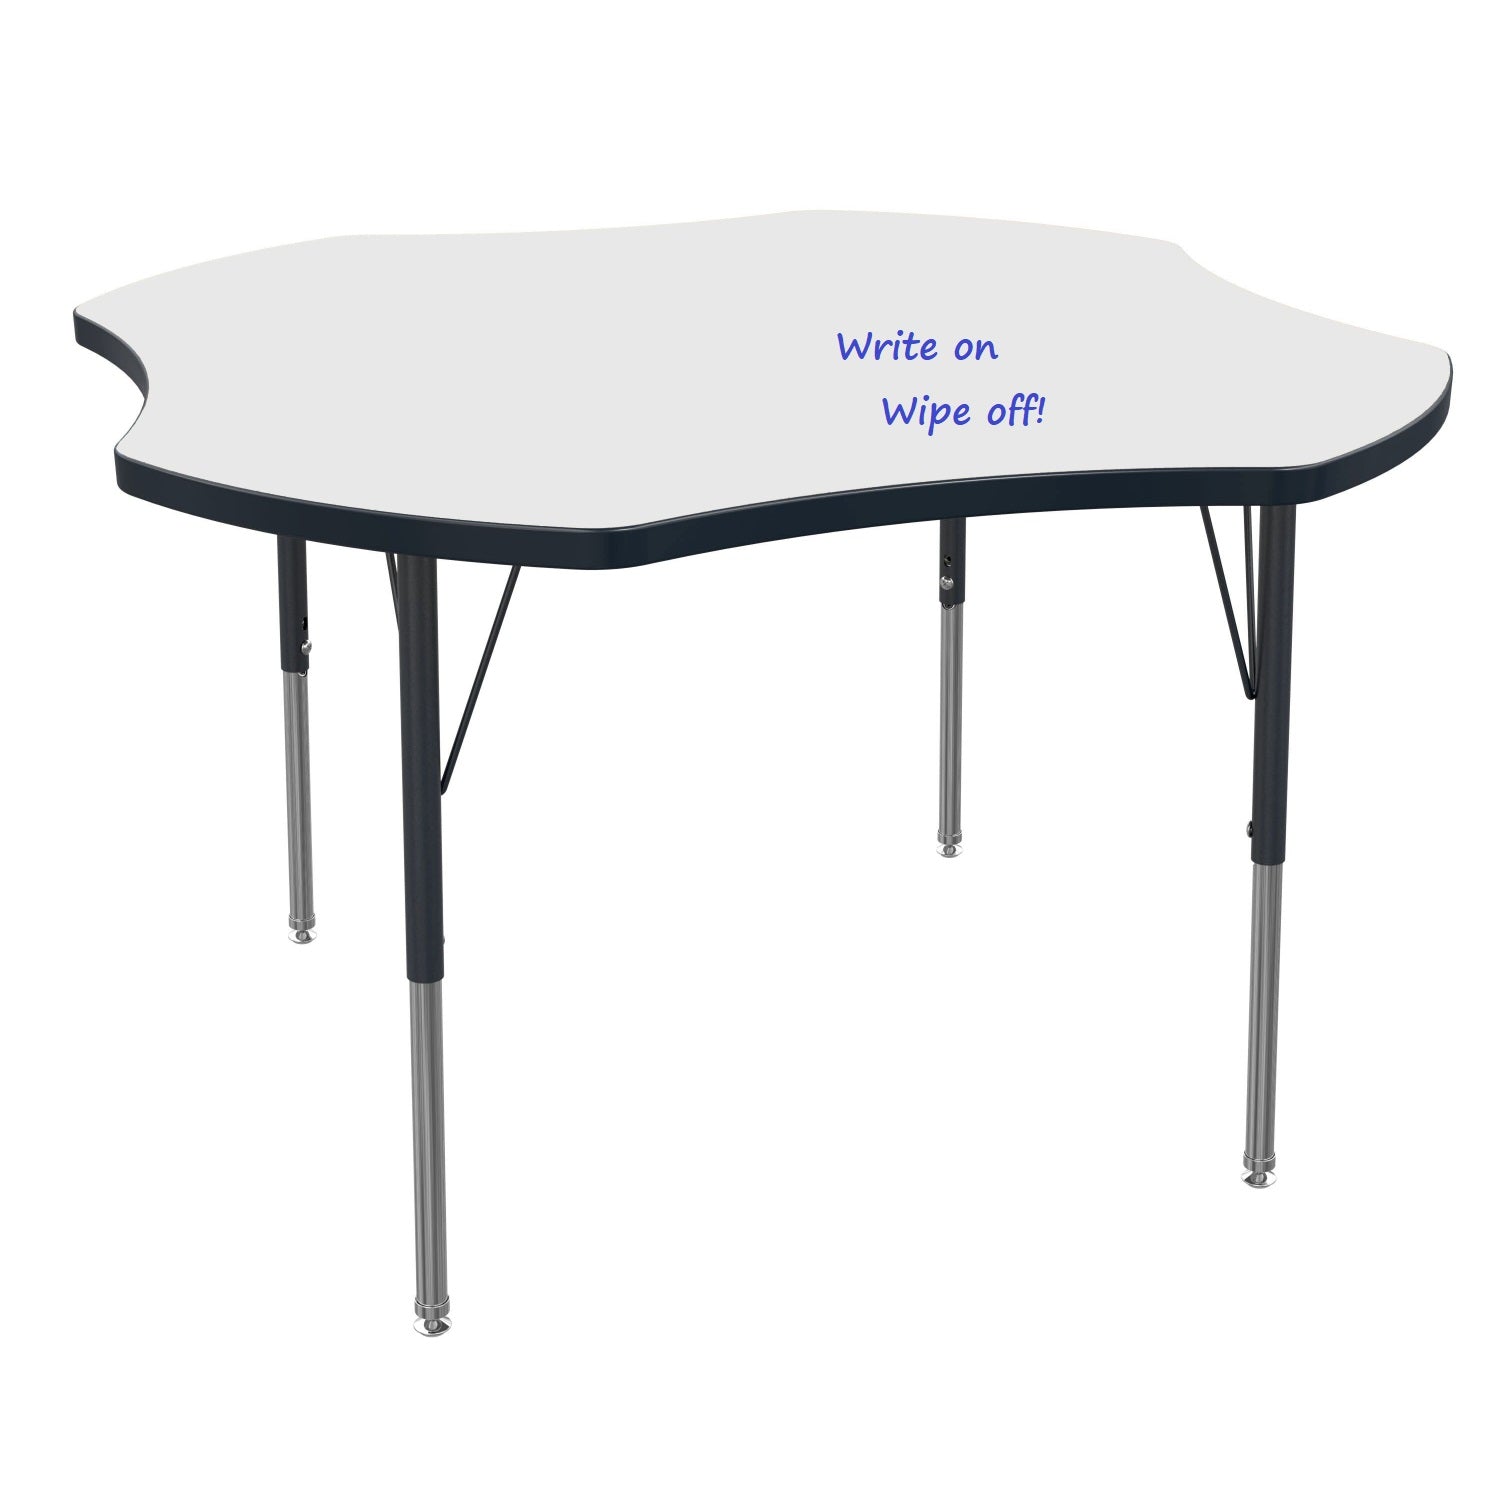 MG Series Adjustable Height Activity Table with White Dry Erase Markerboard Top, 48" Clover